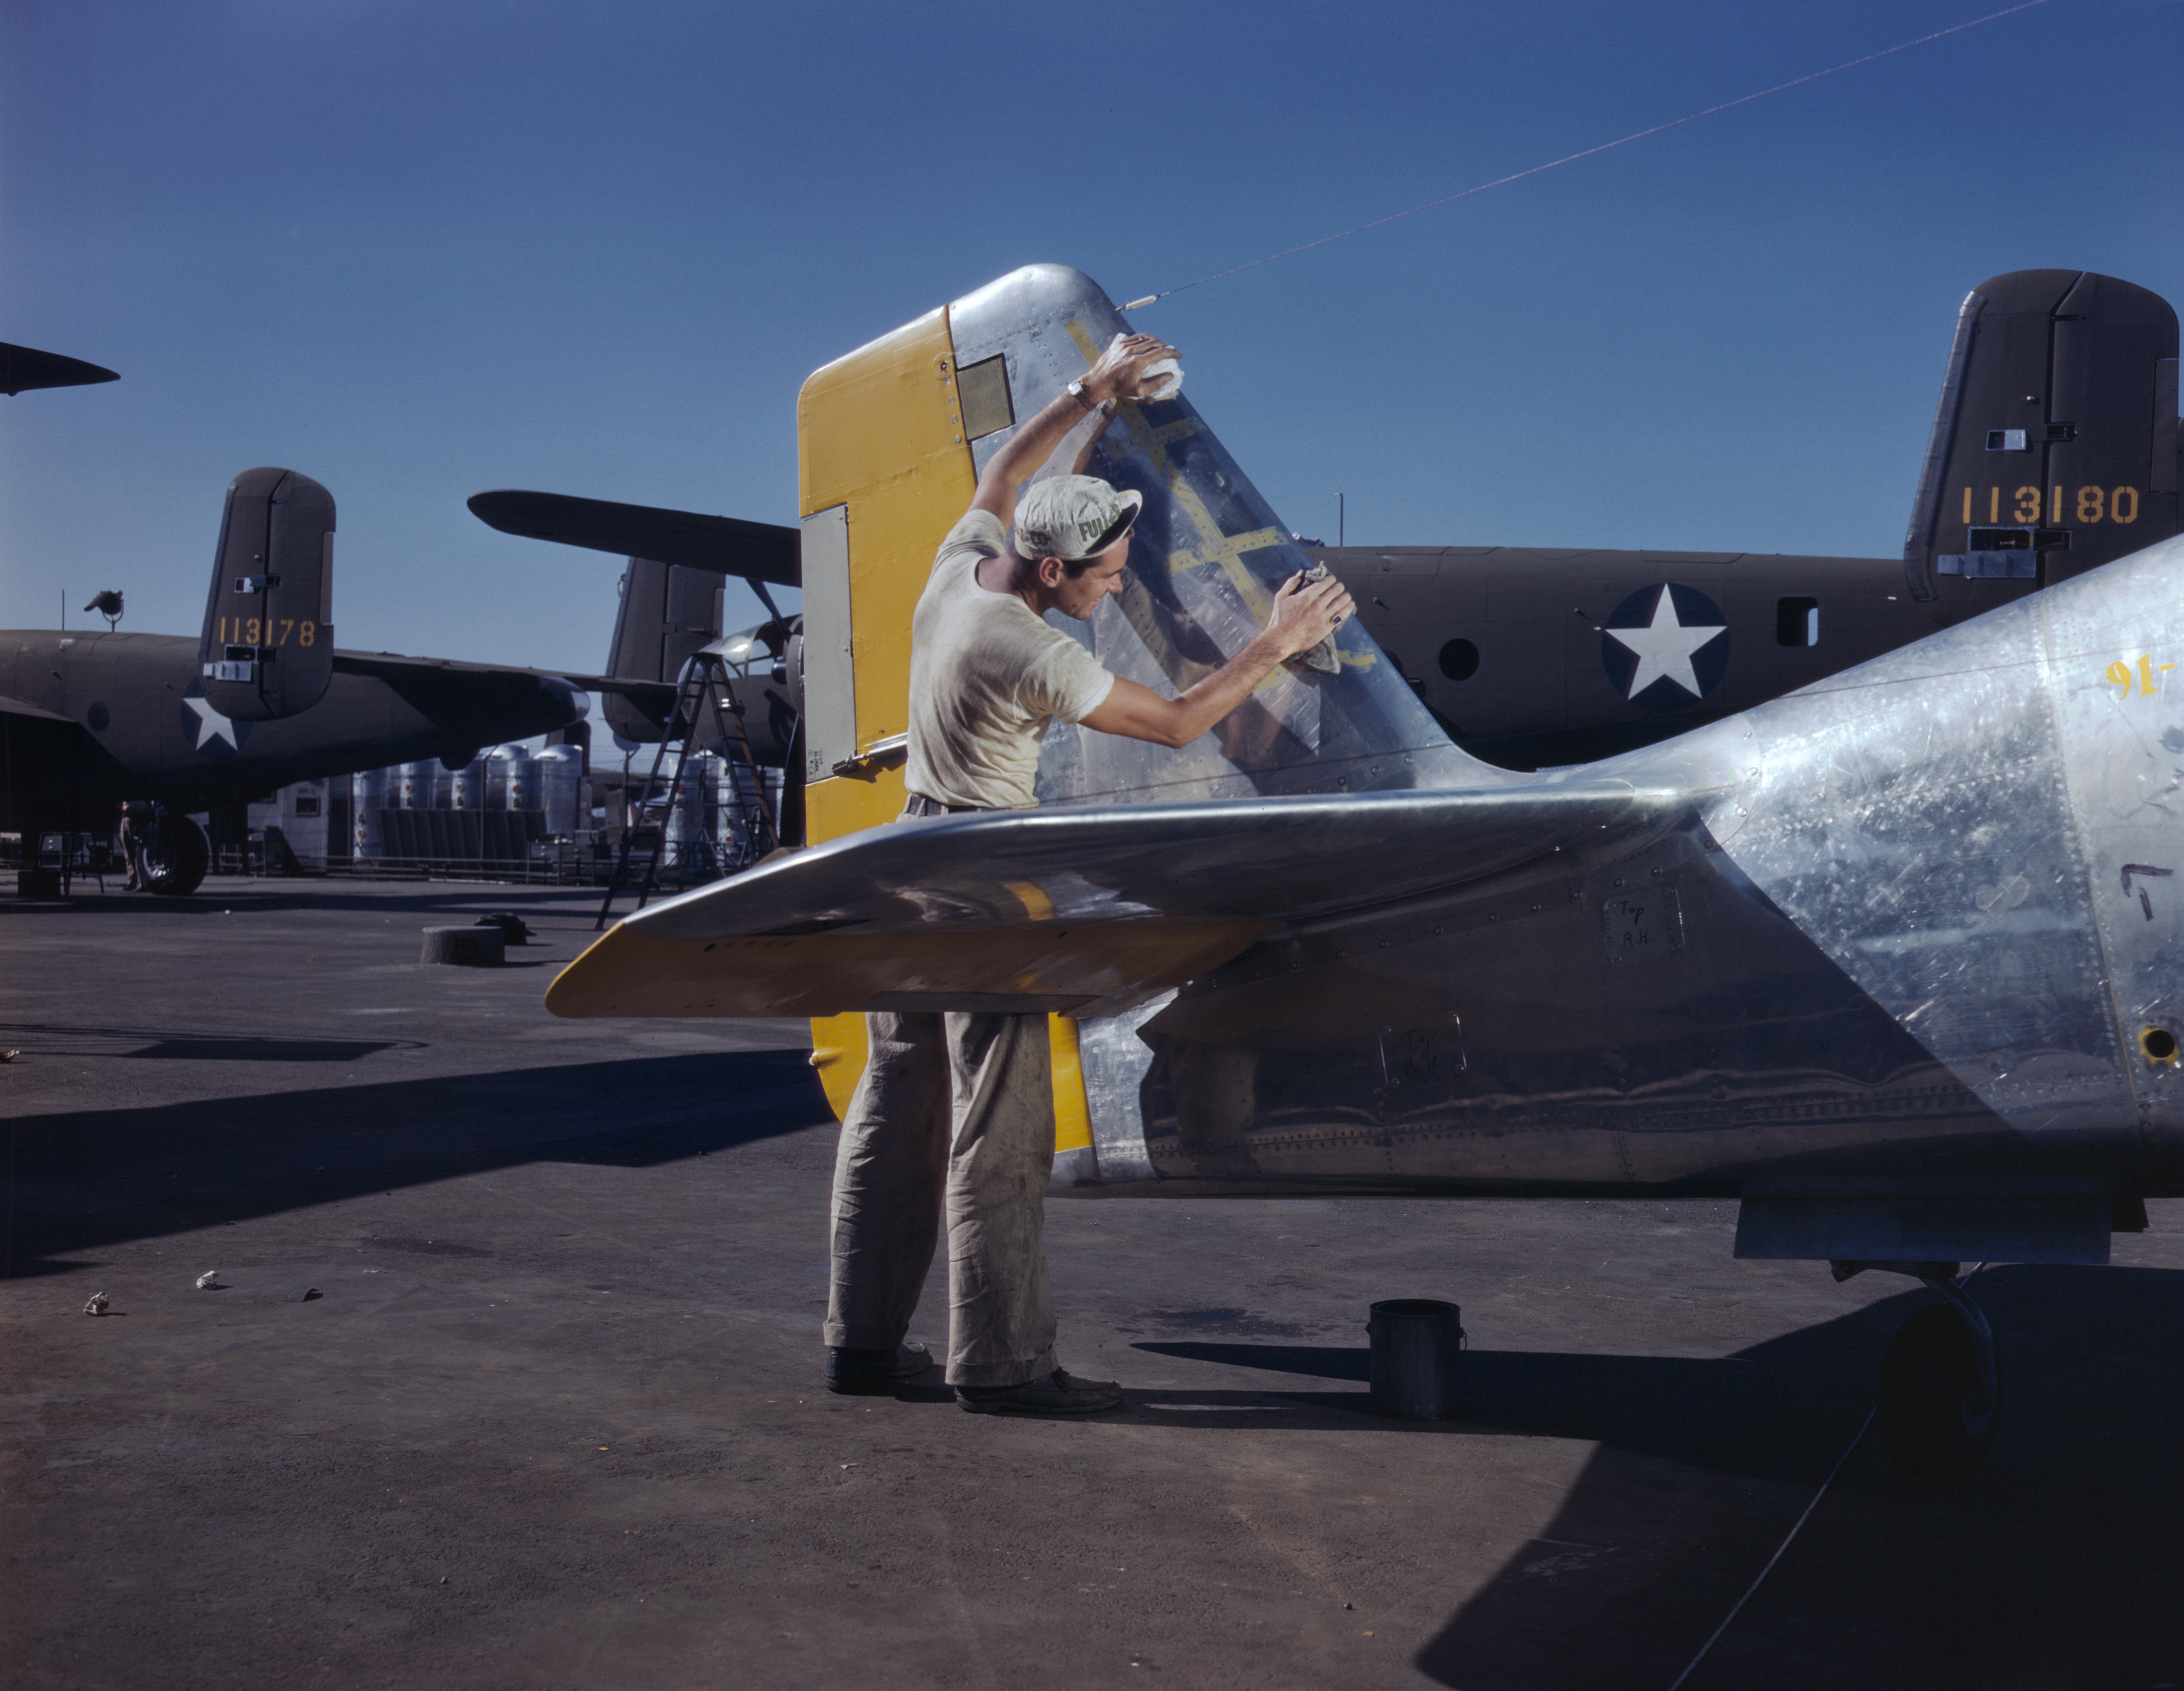 A North American Aviation worker preparing a P-51 Mustang fighter for painting, Inglewood, California, United States, Oct 1942; note B-25 Mitchell bombers in background